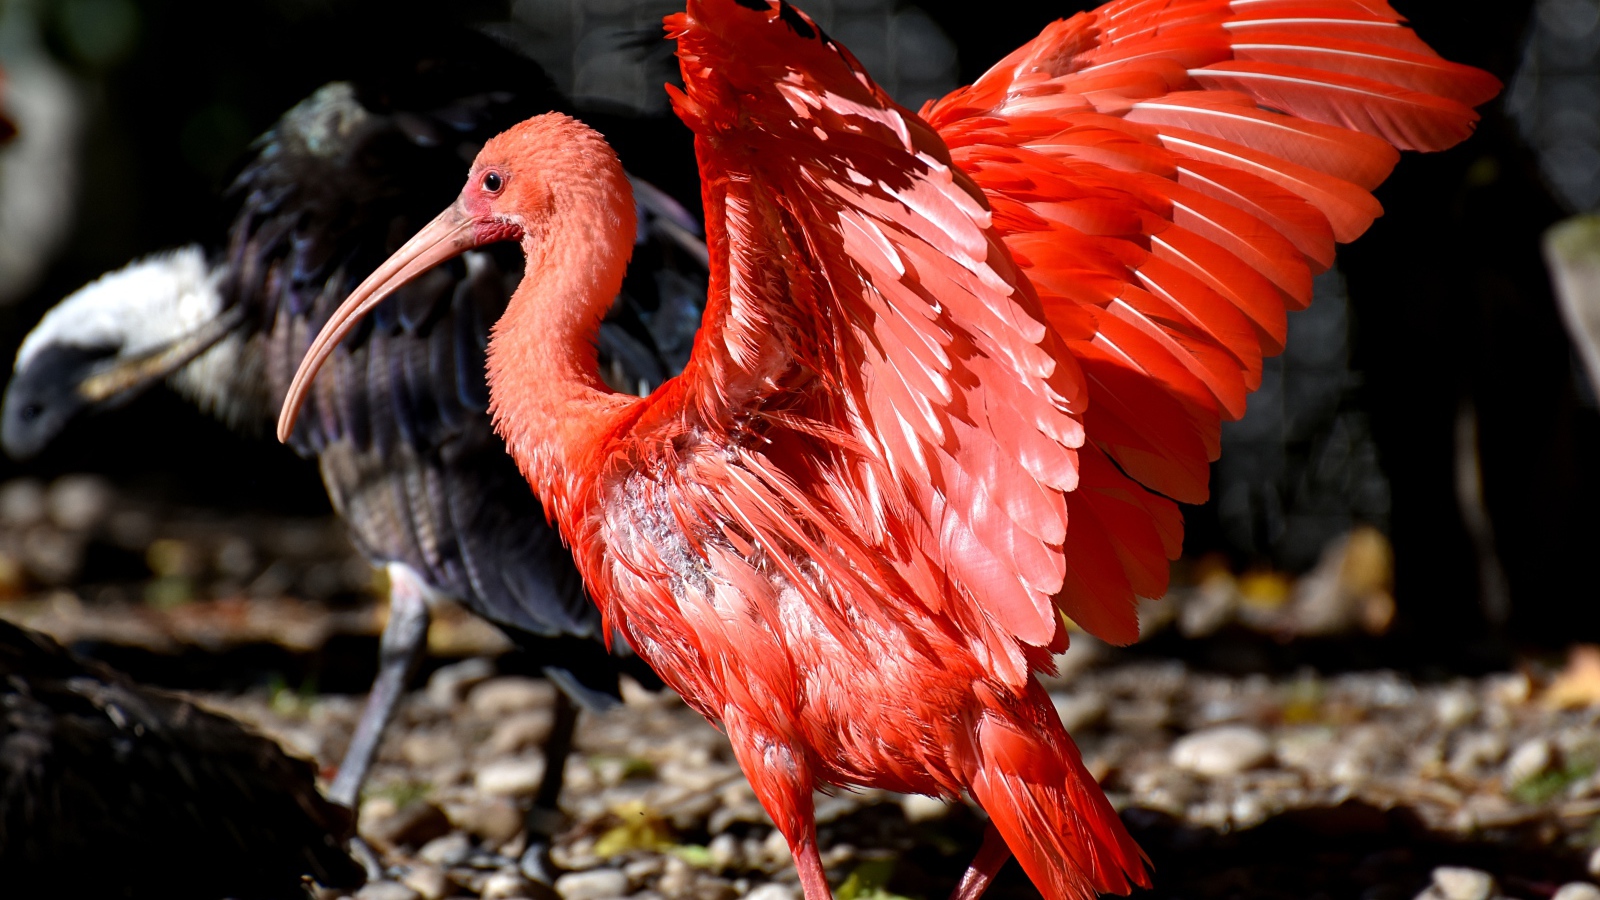 Red ibis spread its wings